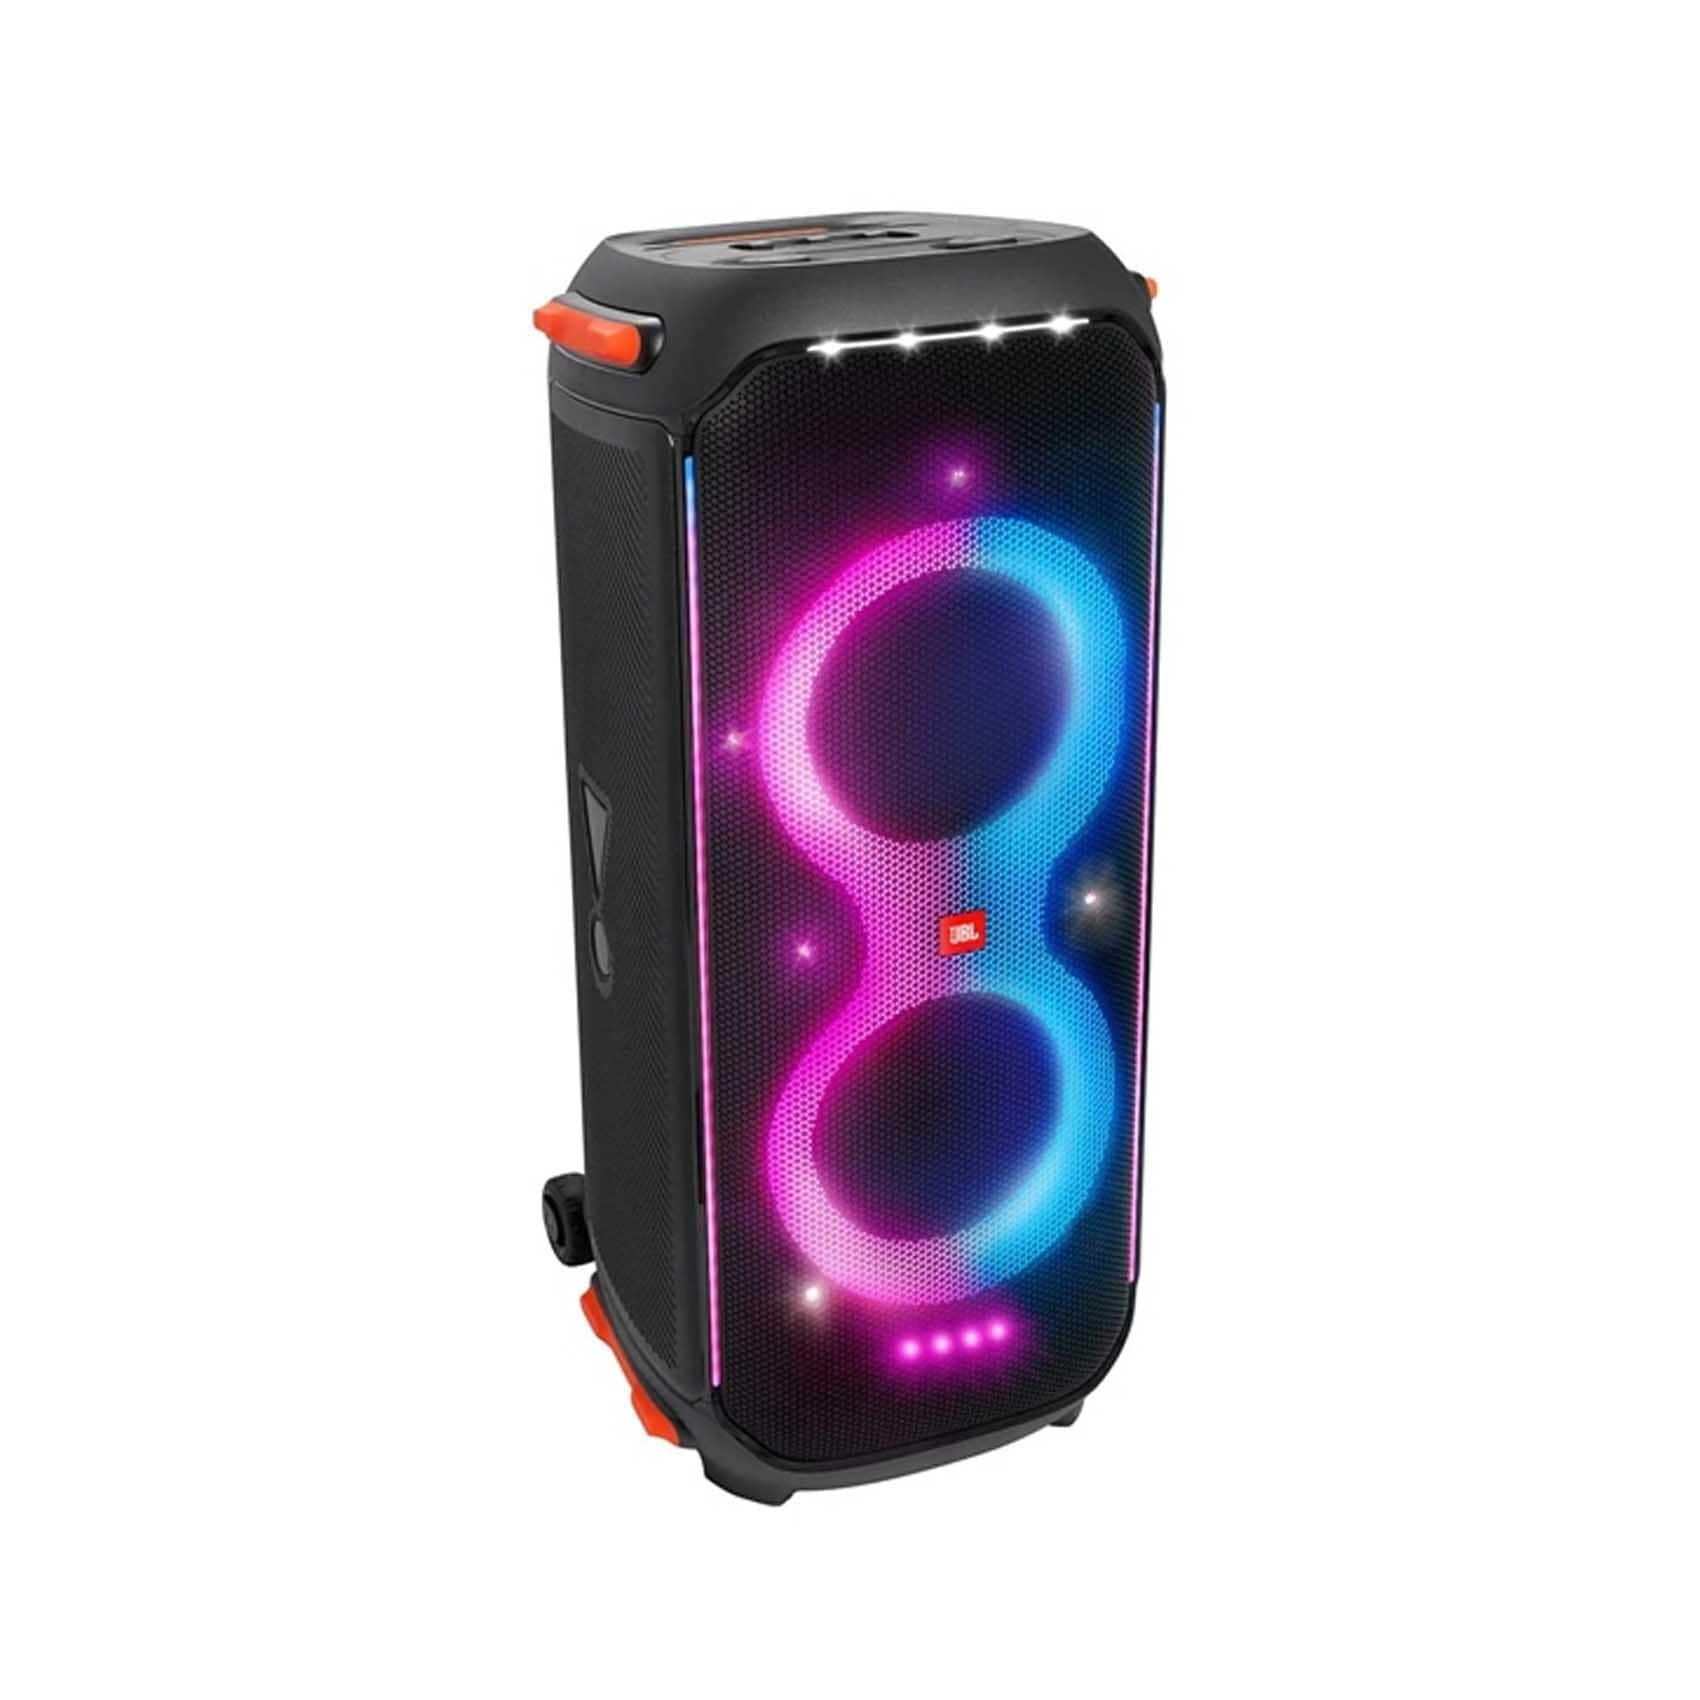 springvand basketball Bestået JBL Partybox 710 EU Bluetooth Party Speaker With Light Effects (Plus Extra  Supplier's Delivery Charge Outside Doha)